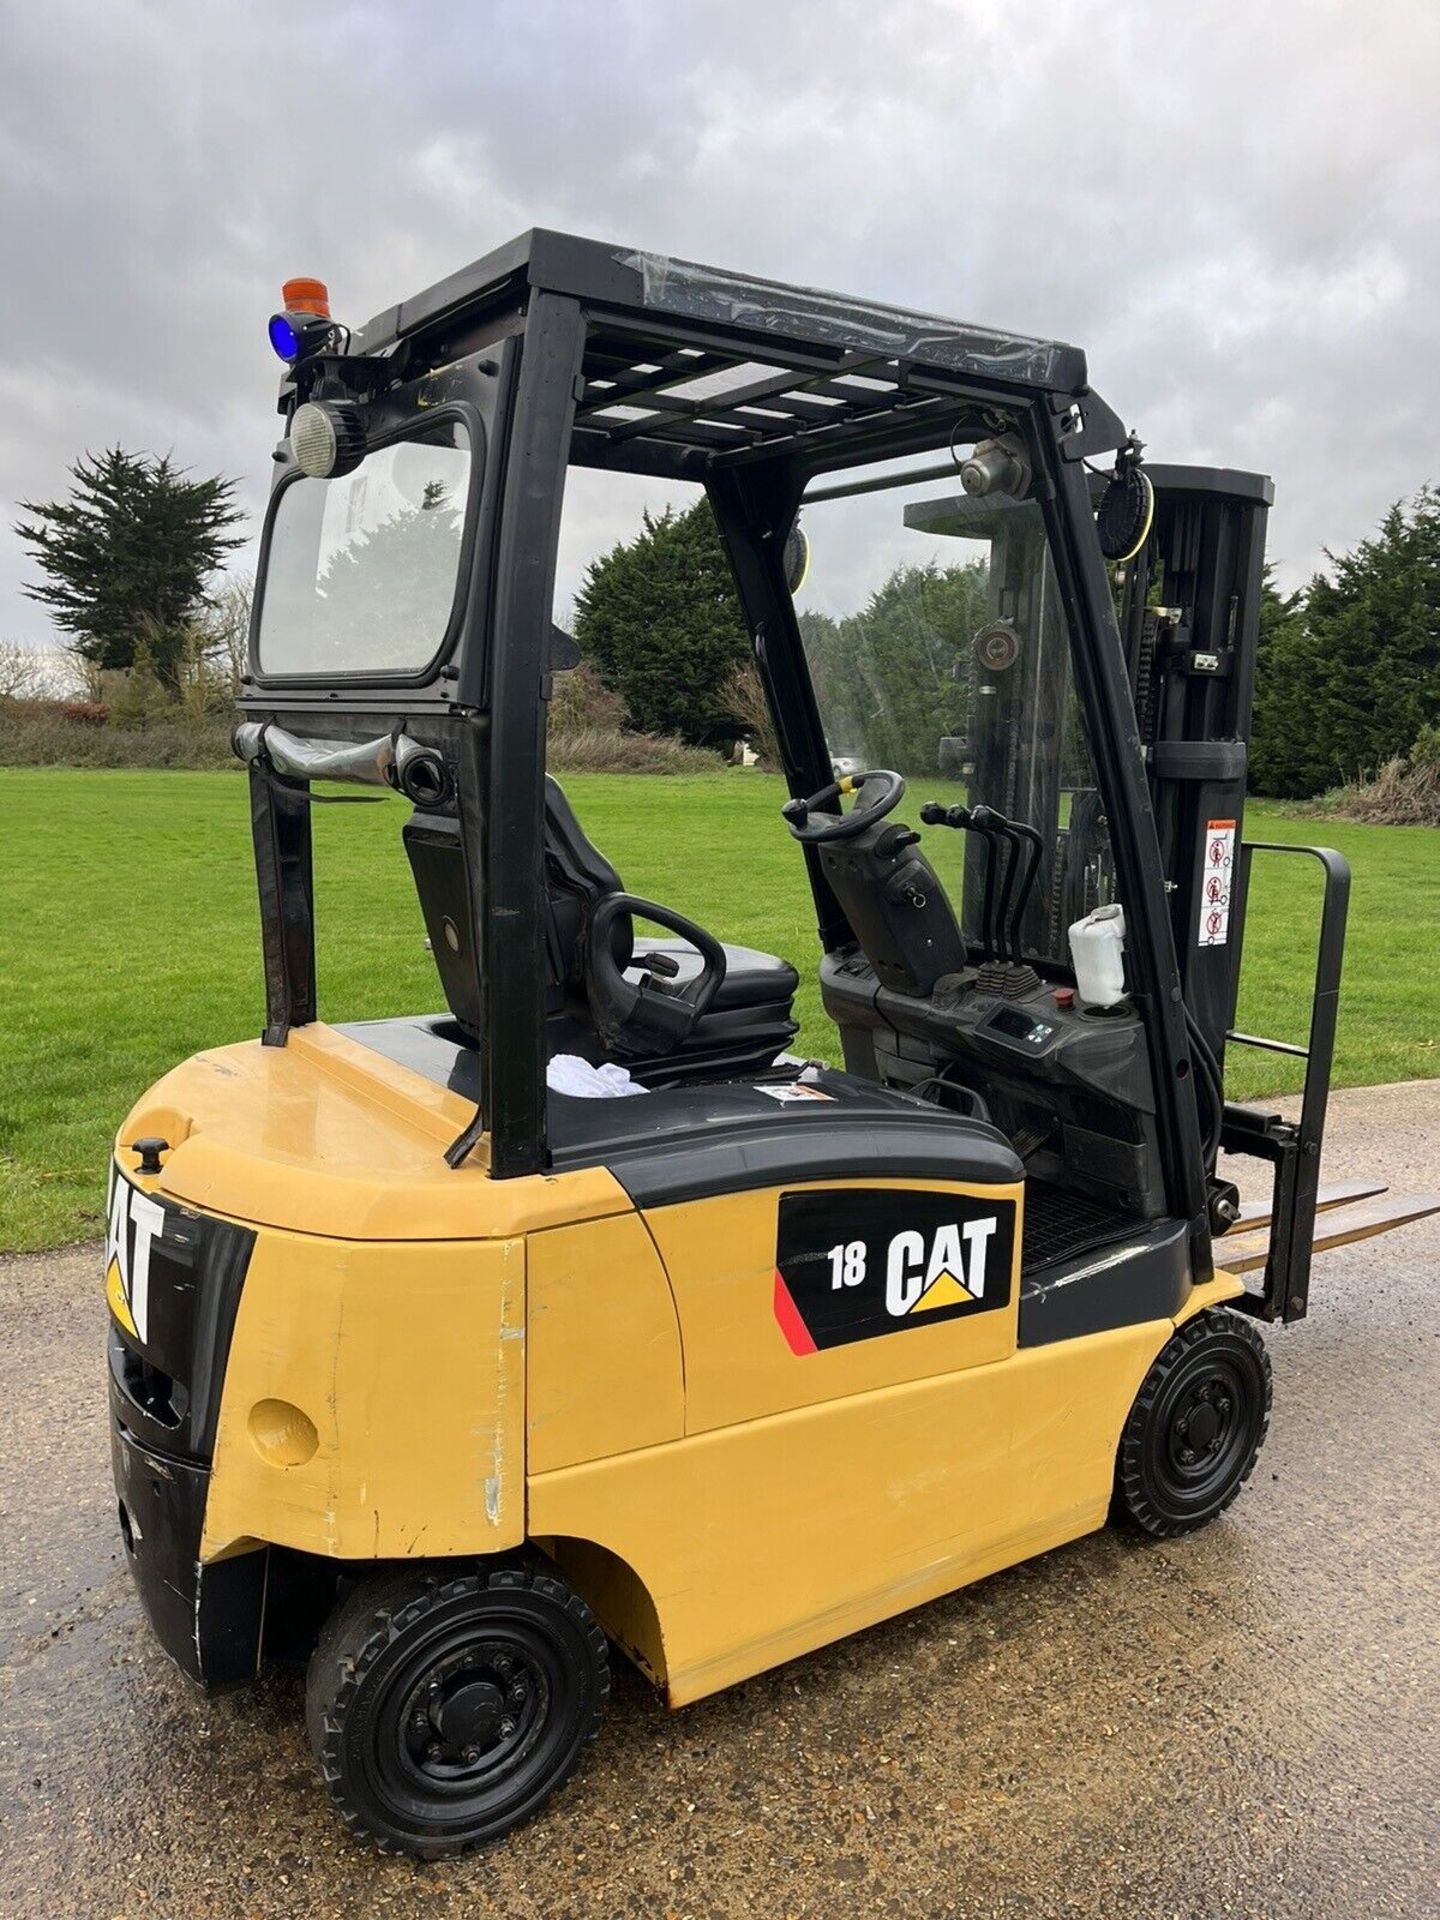 CATERPILLAR 1.8 Electric Forklift Truck (Container Spec) - Image 2 of 7